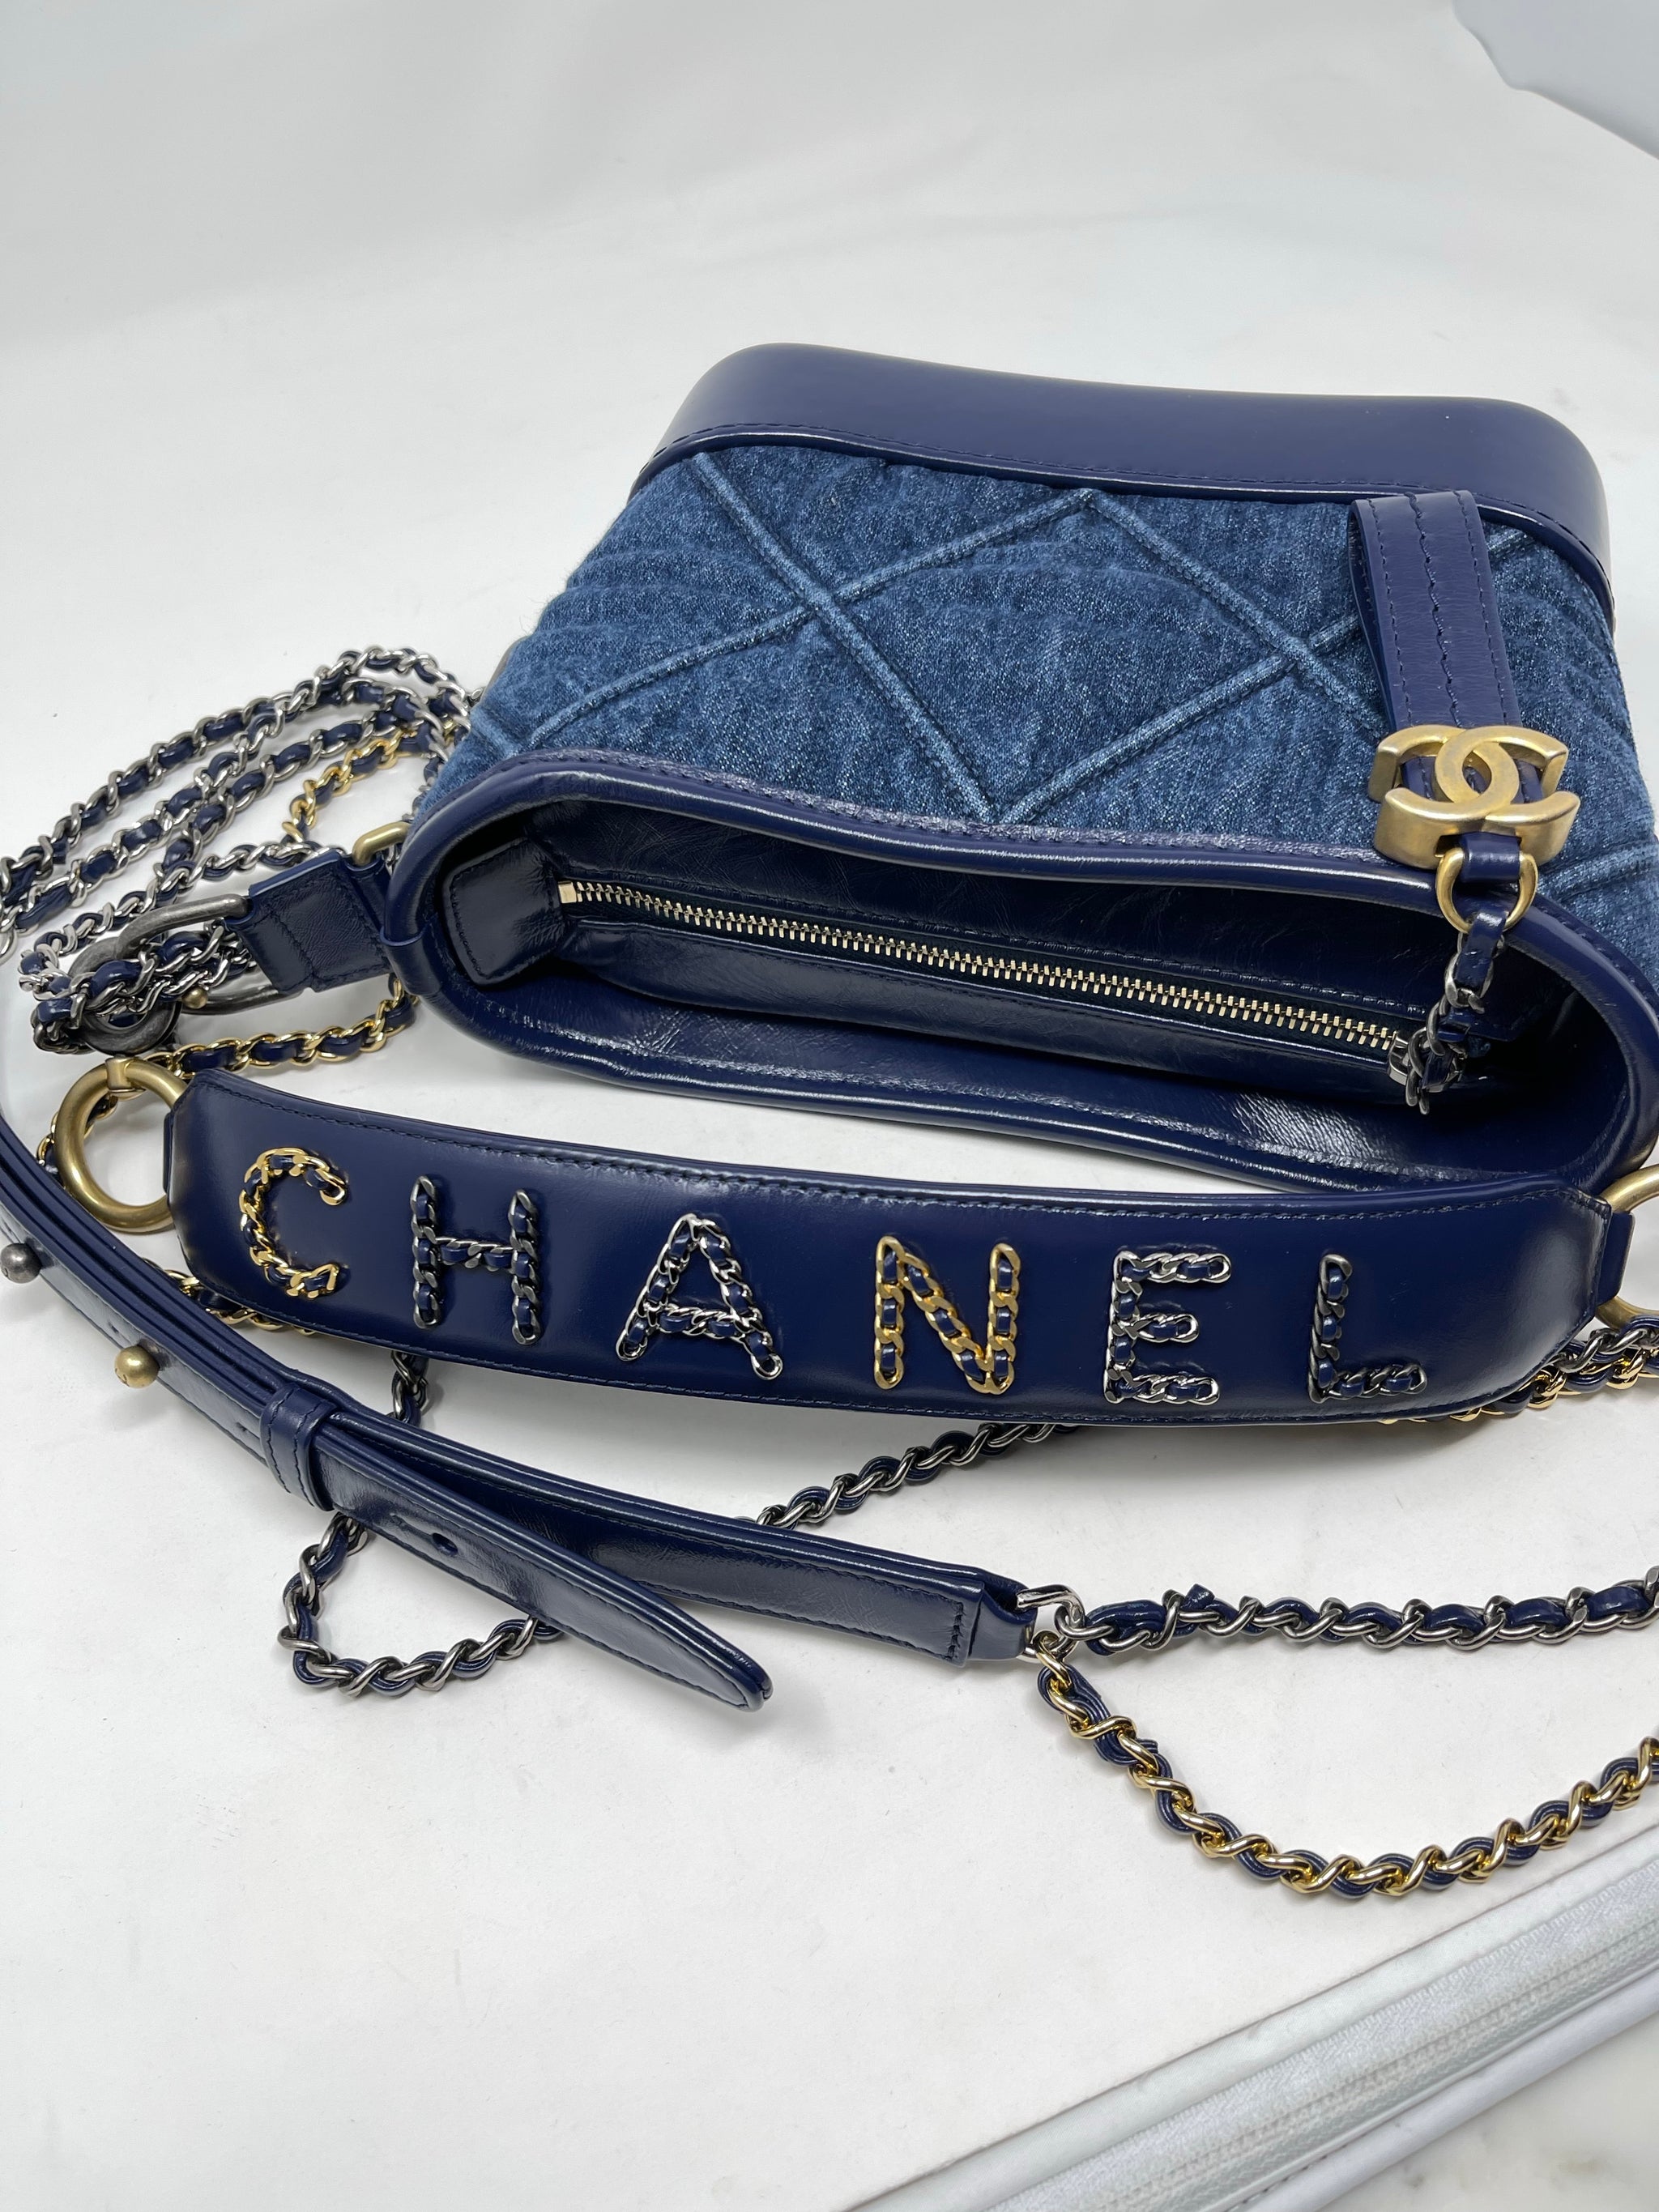 Chanel Gabrielle Wallet On Chain Shoulder Bag in Blue And Black